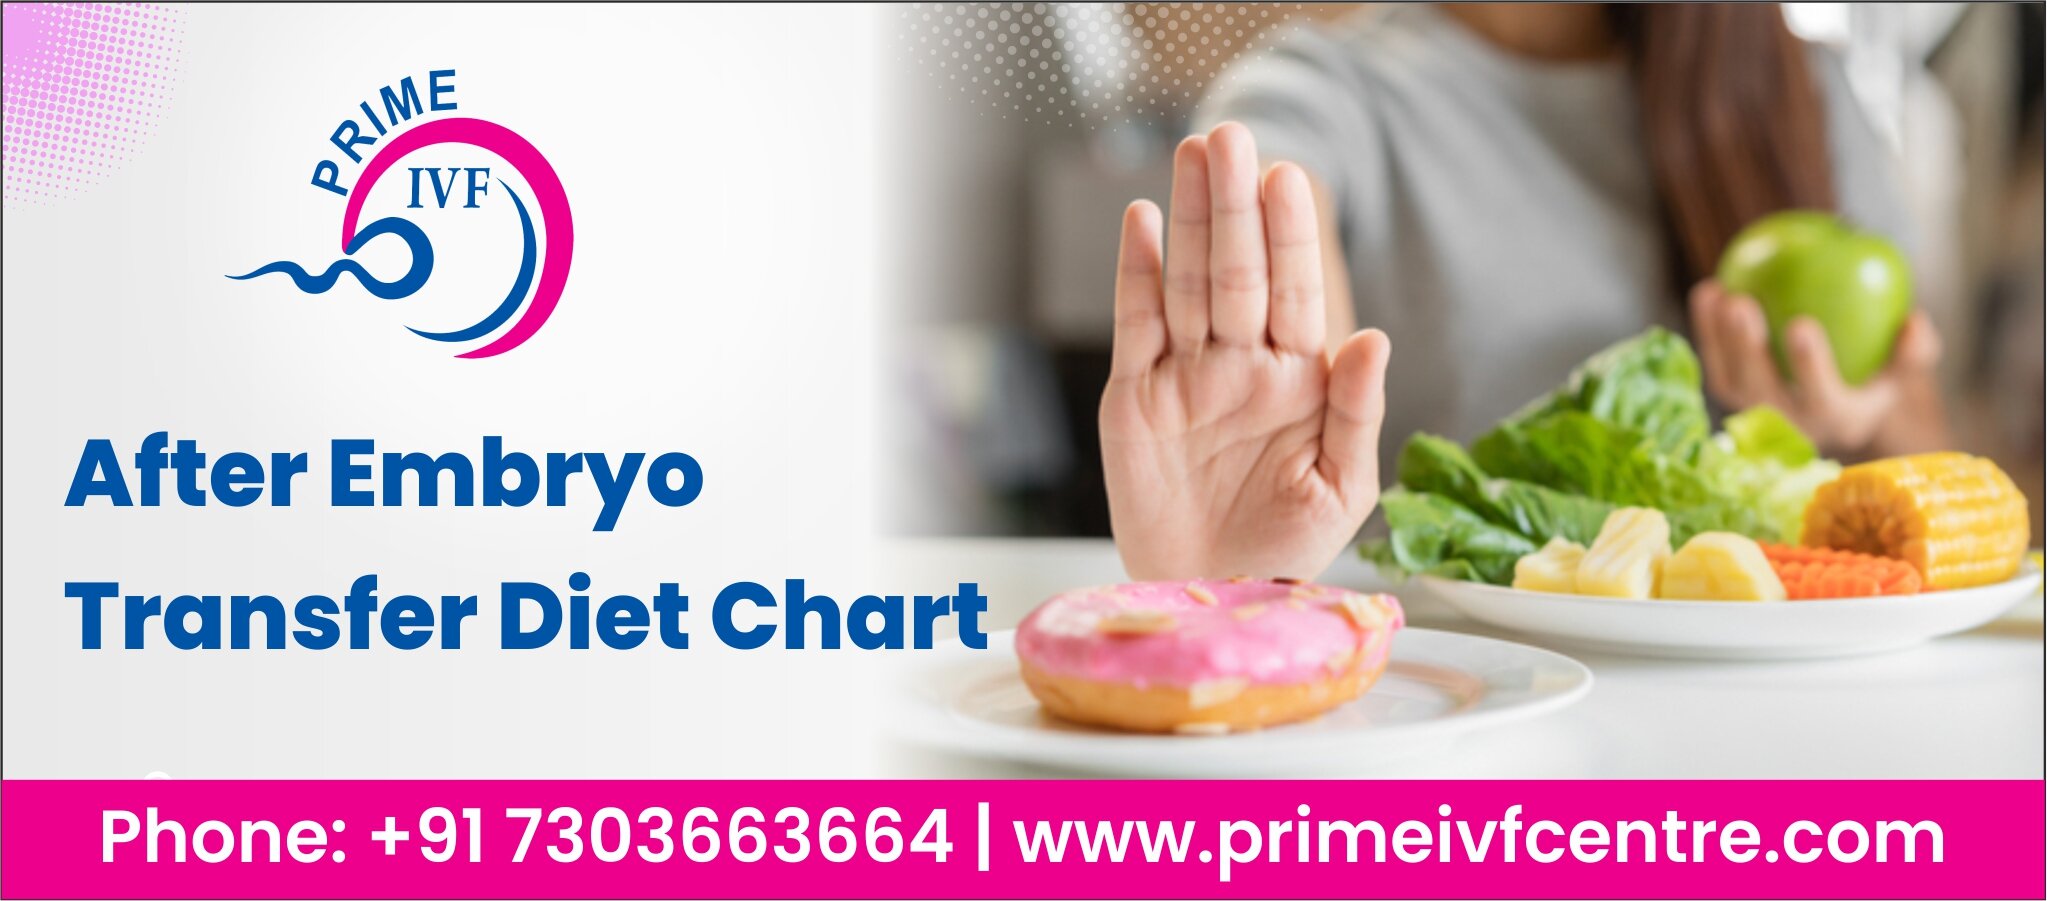 After Embryo Transfer Diet Chart